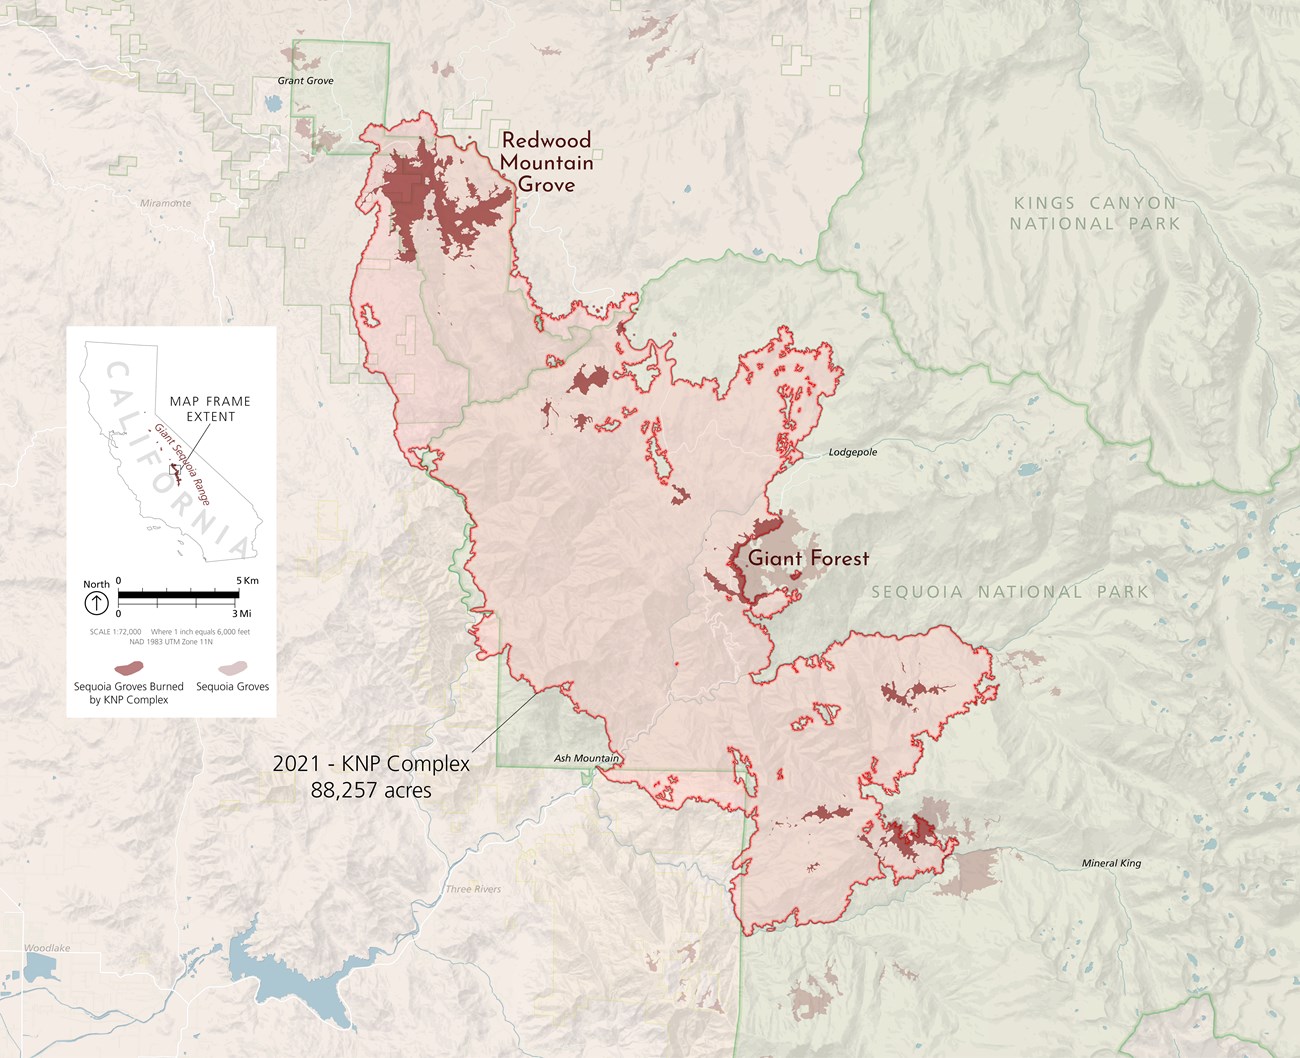 Map showing the KNP Complex Fire boundary and sequoia grove areas that burned in the fire.